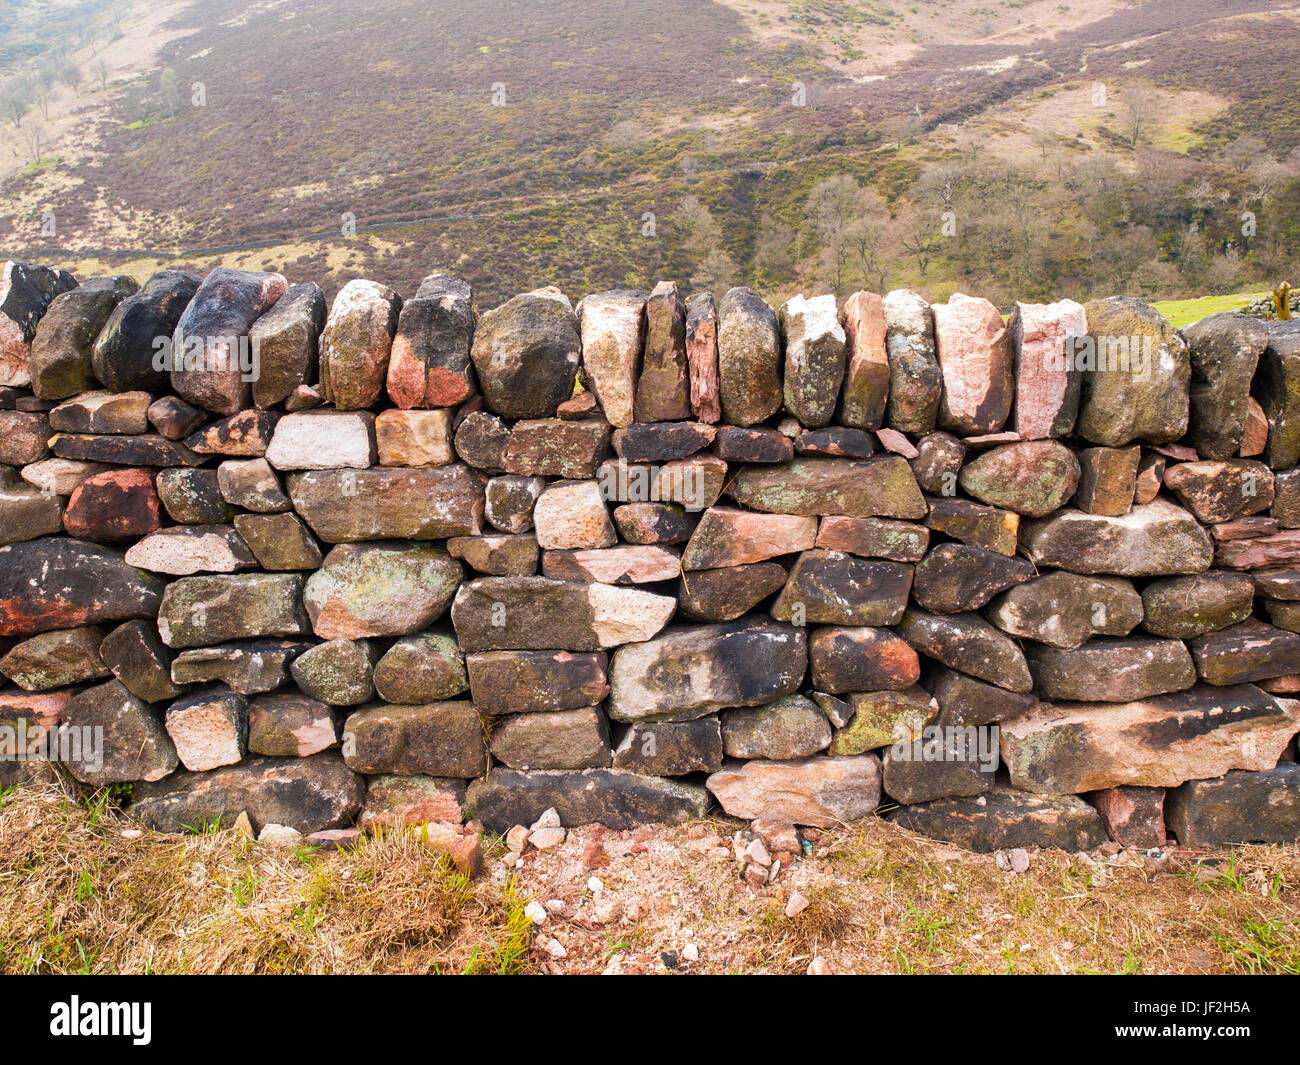 BRITAINS FARM DRY STONE WALL SECTIONS